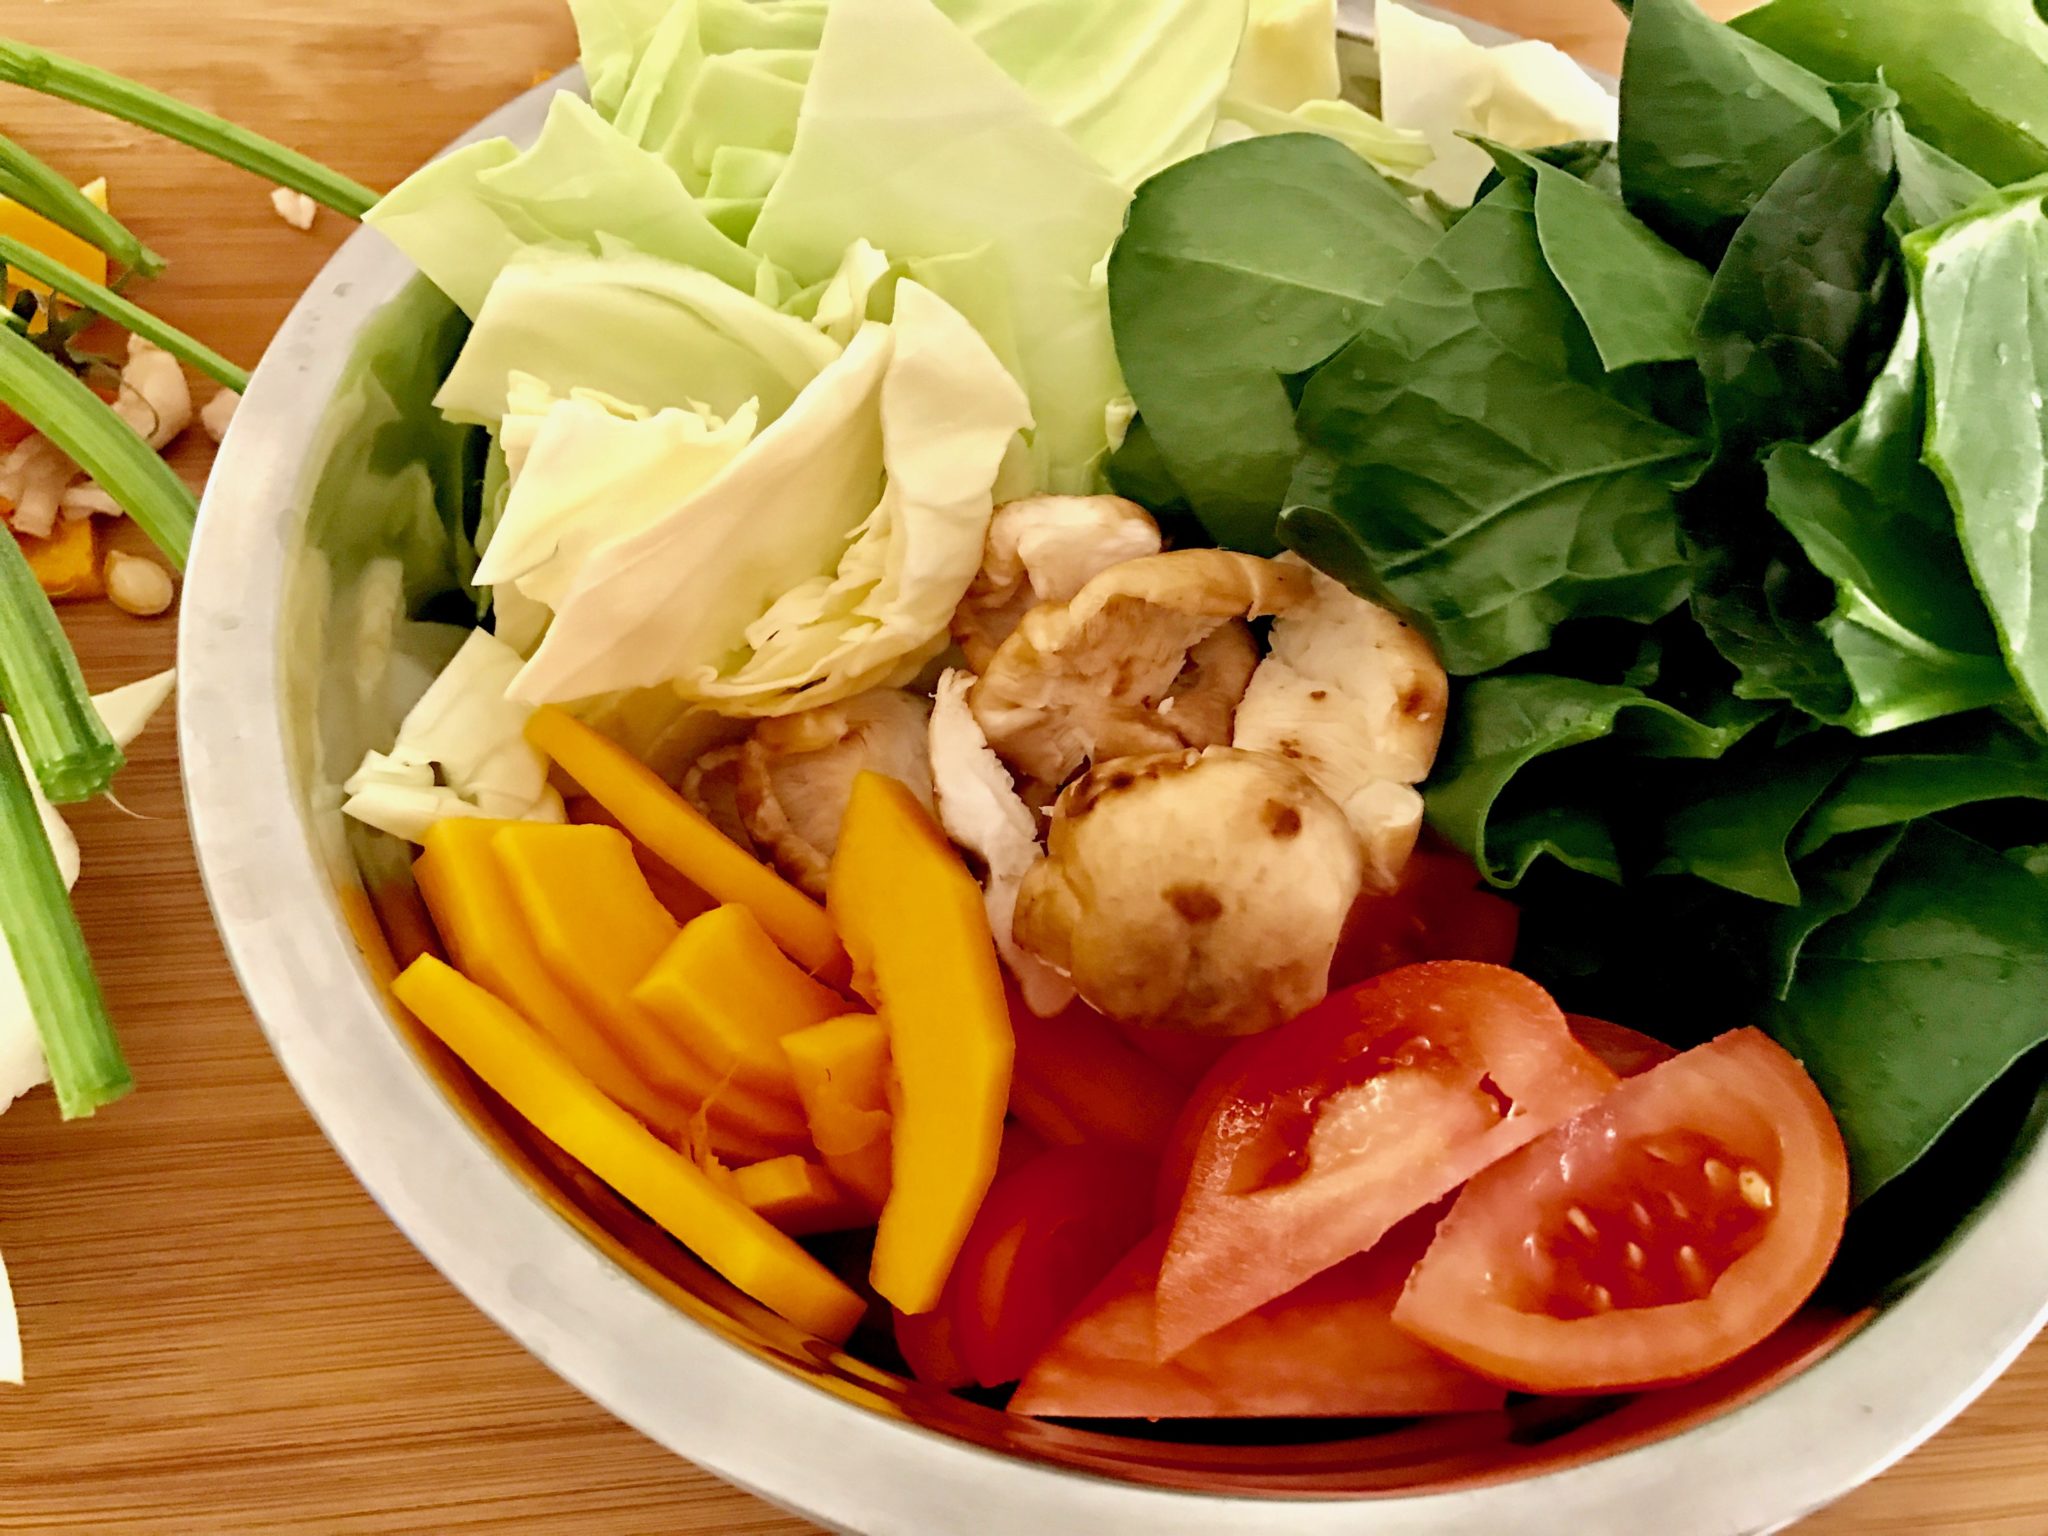 prepared vegetables in a bowl